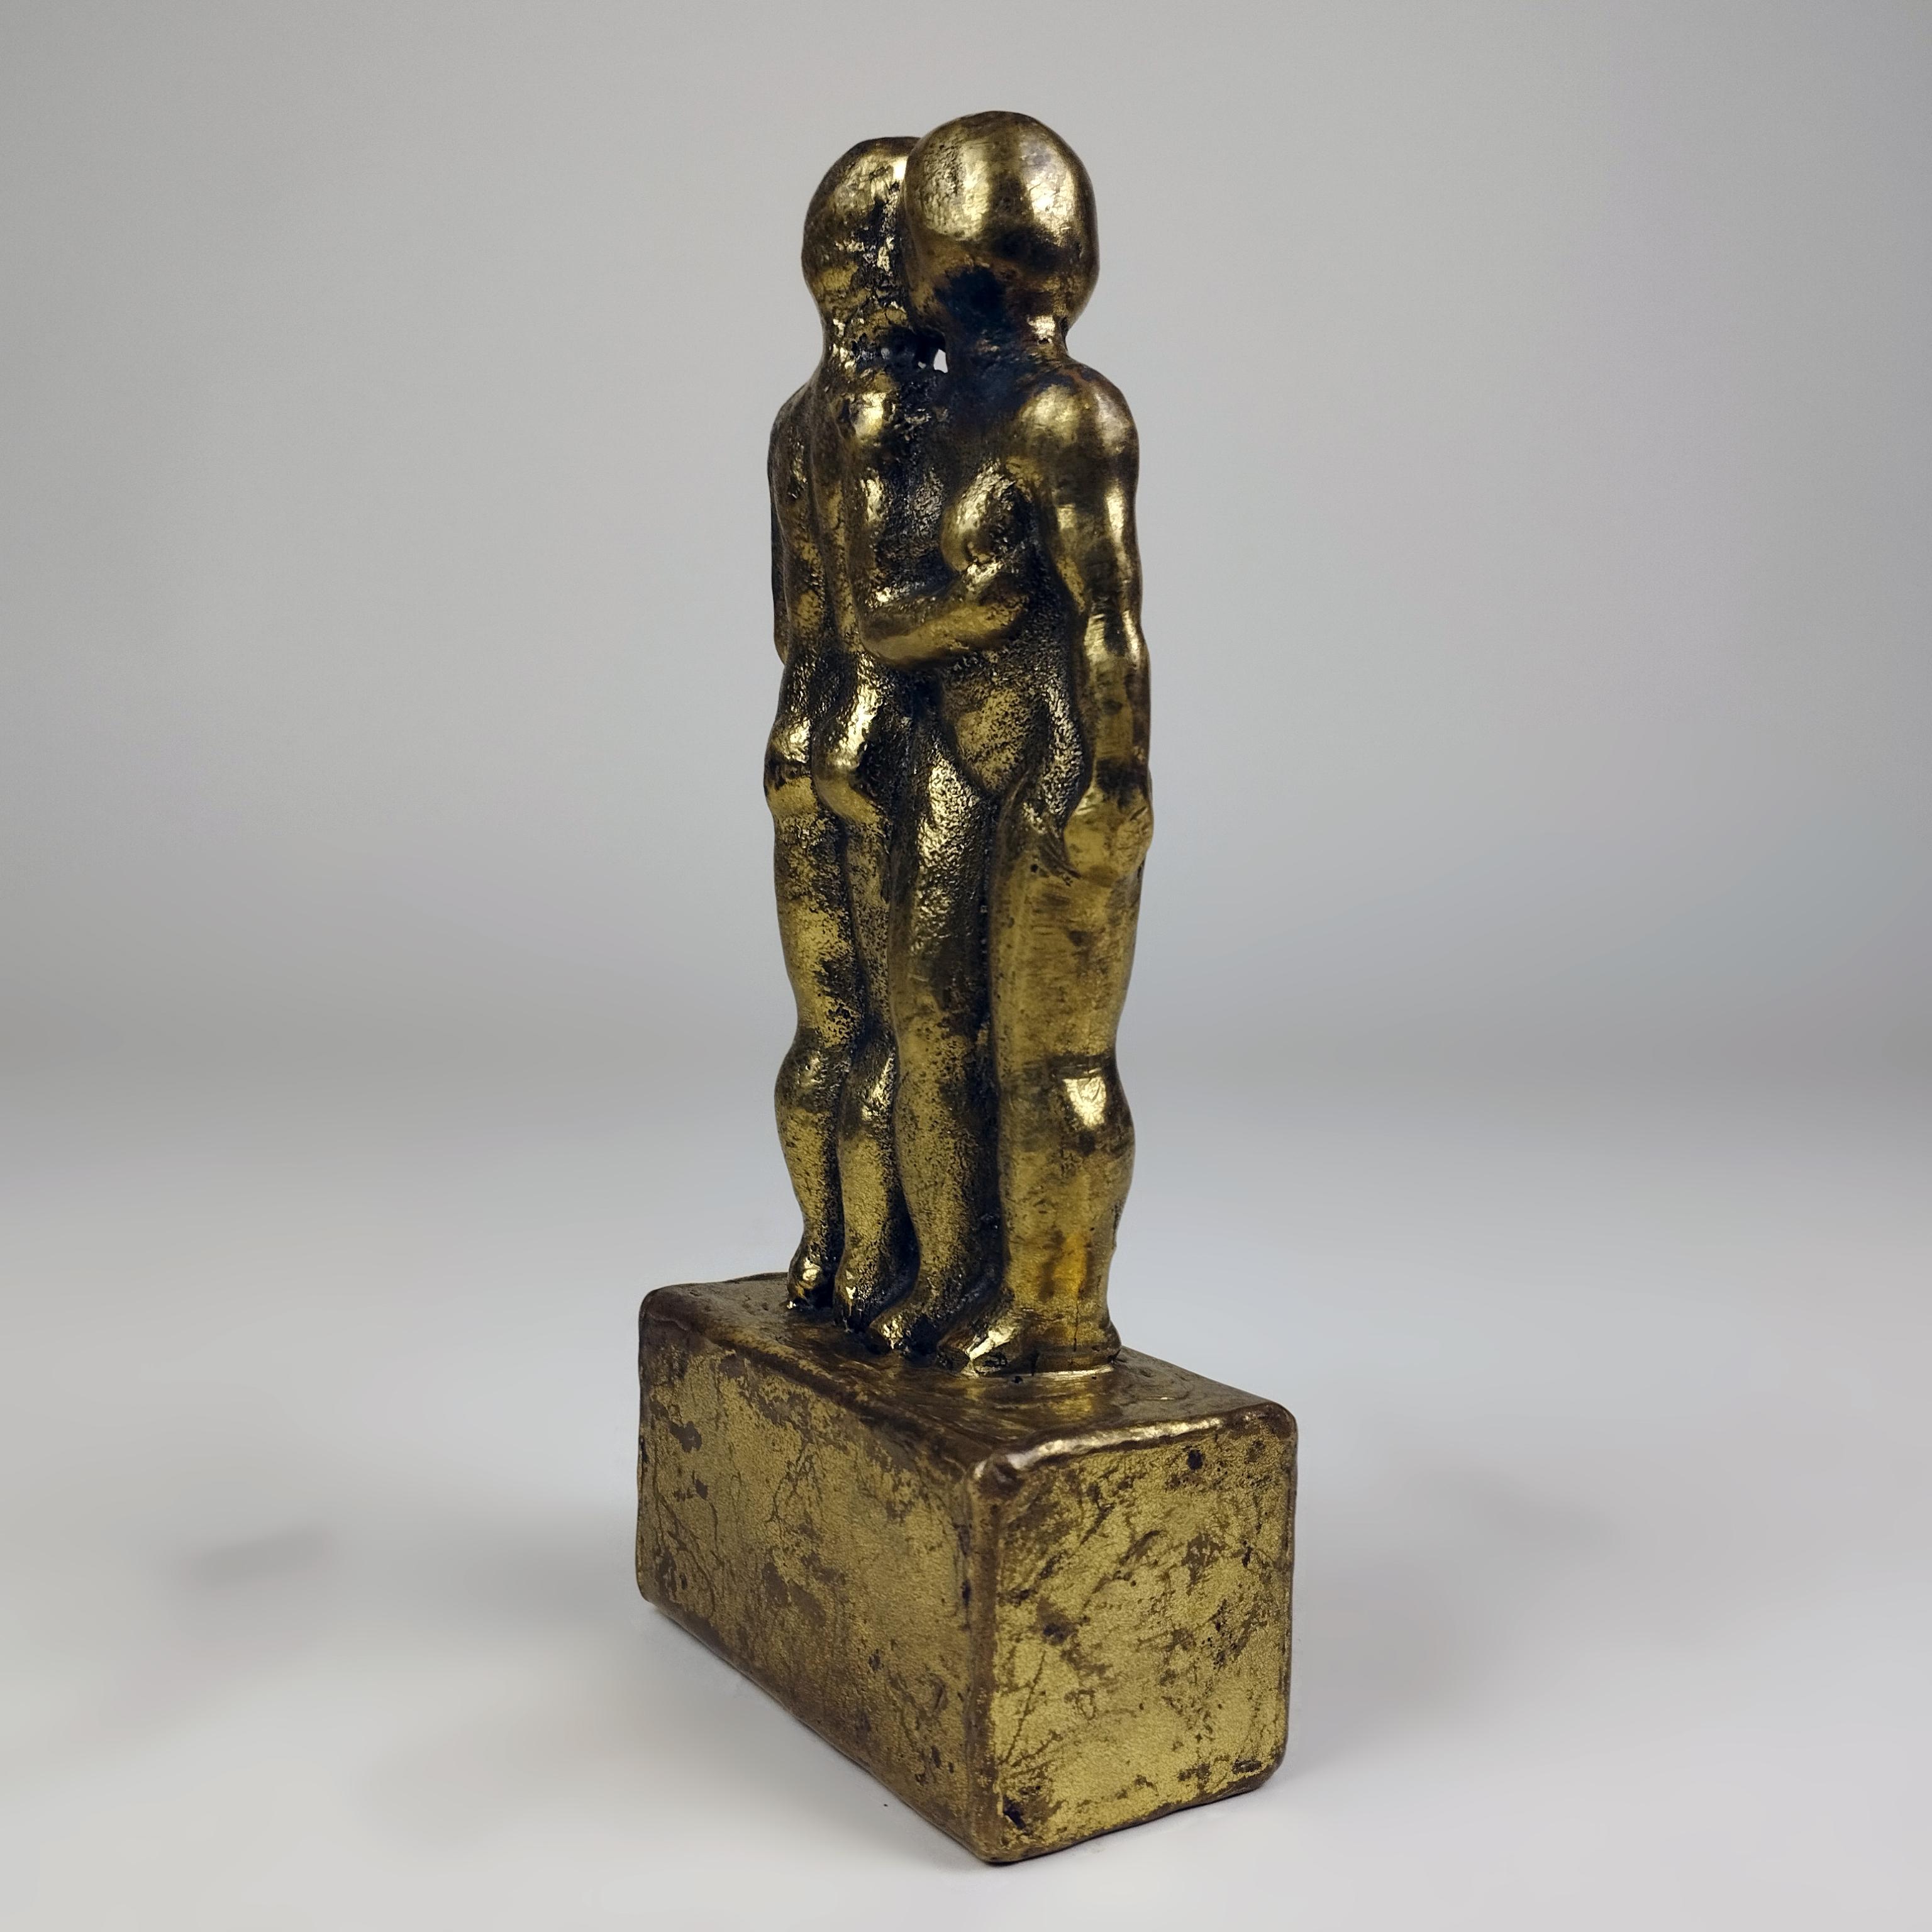 A Brutalist cast bronze sculpture with gilt steel base depicting a couple kissing by Hungarian-born Mexican artist Pal Kepenyes. The sculpture is signed on one of the base's sides.

A sculptor from Hungary who was nationalized Mexican, Pal Kepenyes